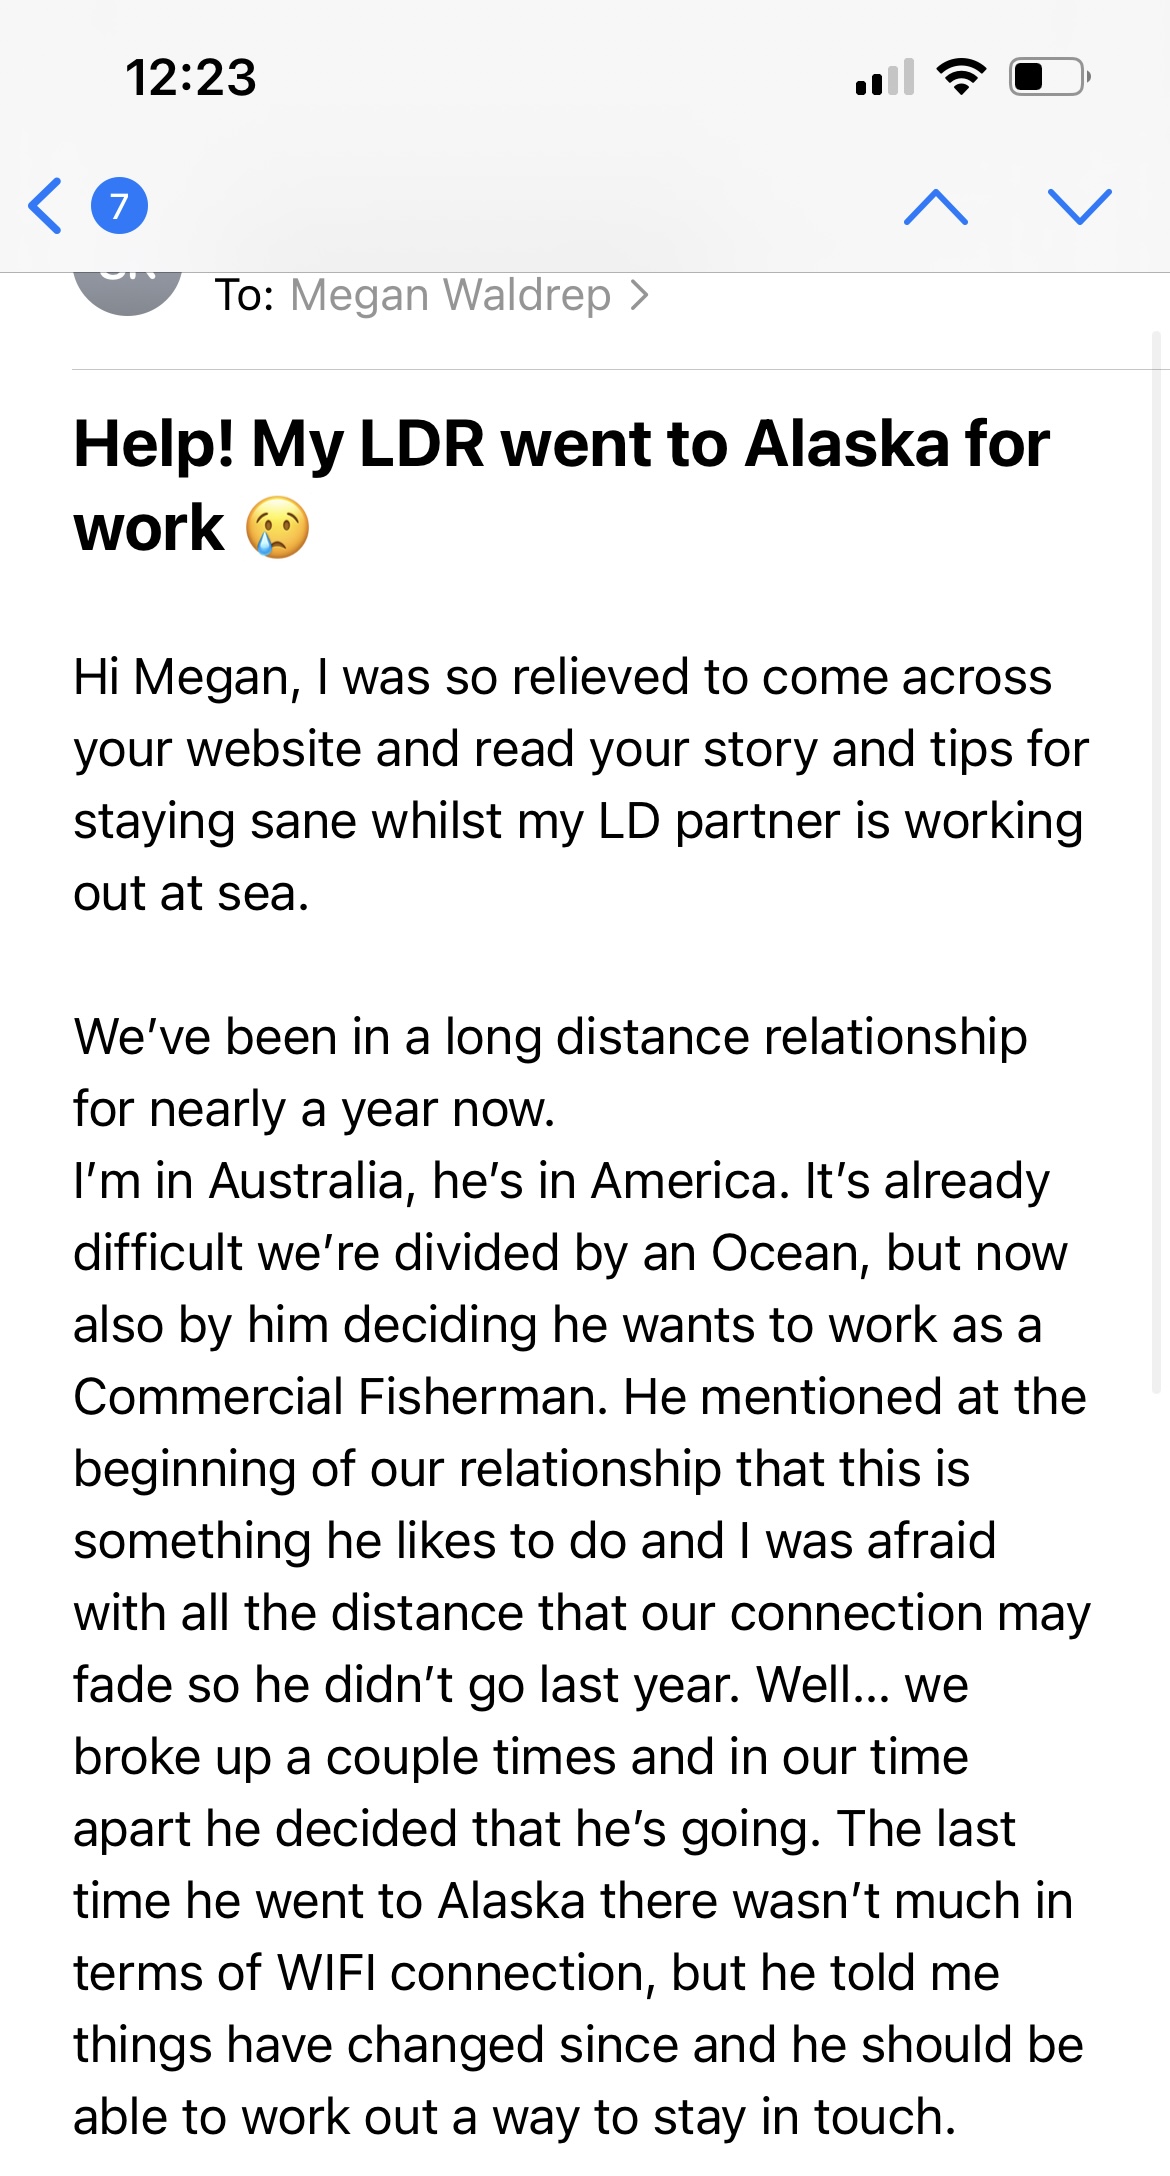 Advice for dating a fisherman